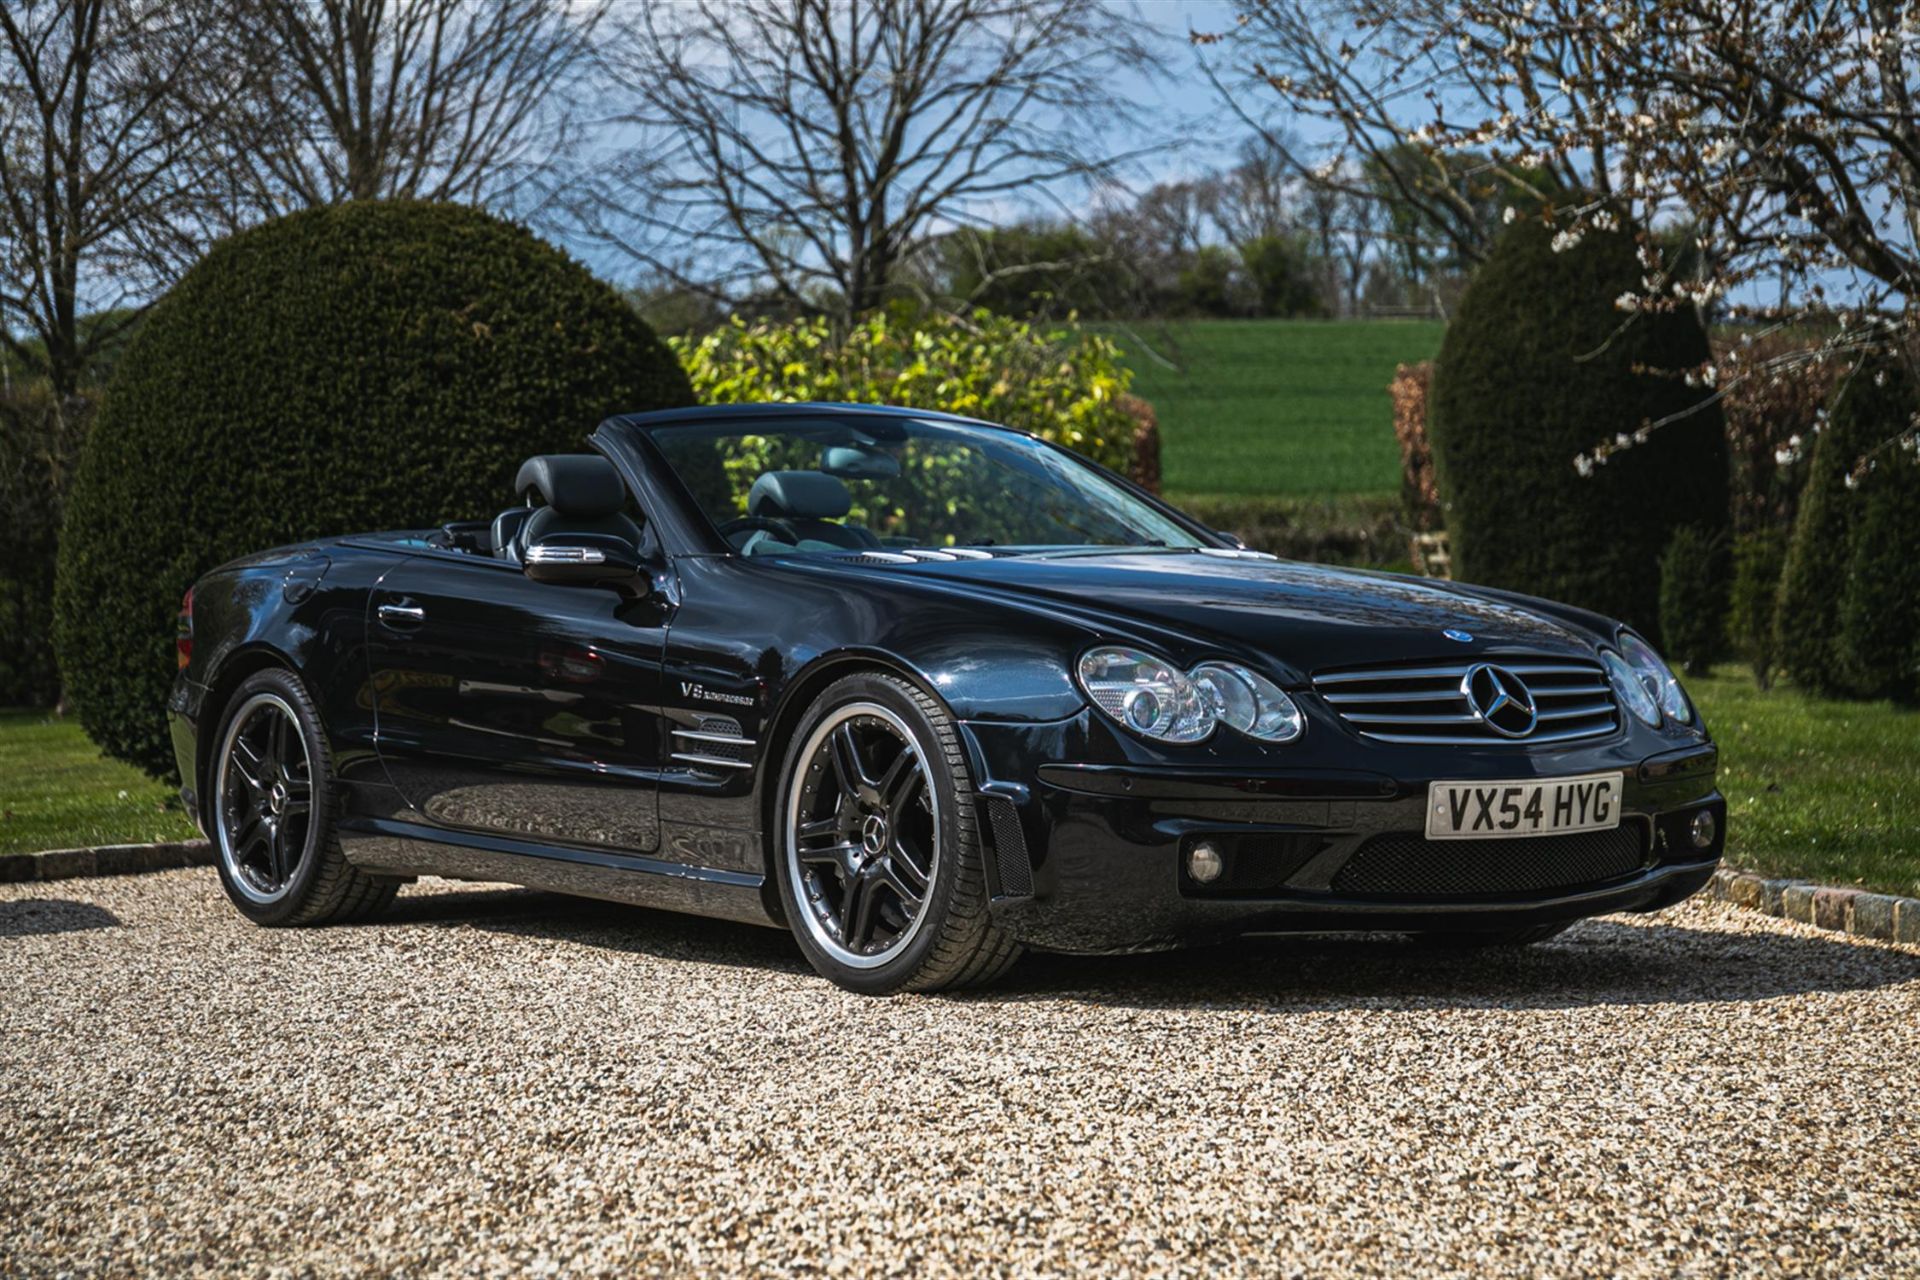 2004 Mercedes-Benz SL55 (R230) 'F1 Performance Pack' - Image 5 of 10